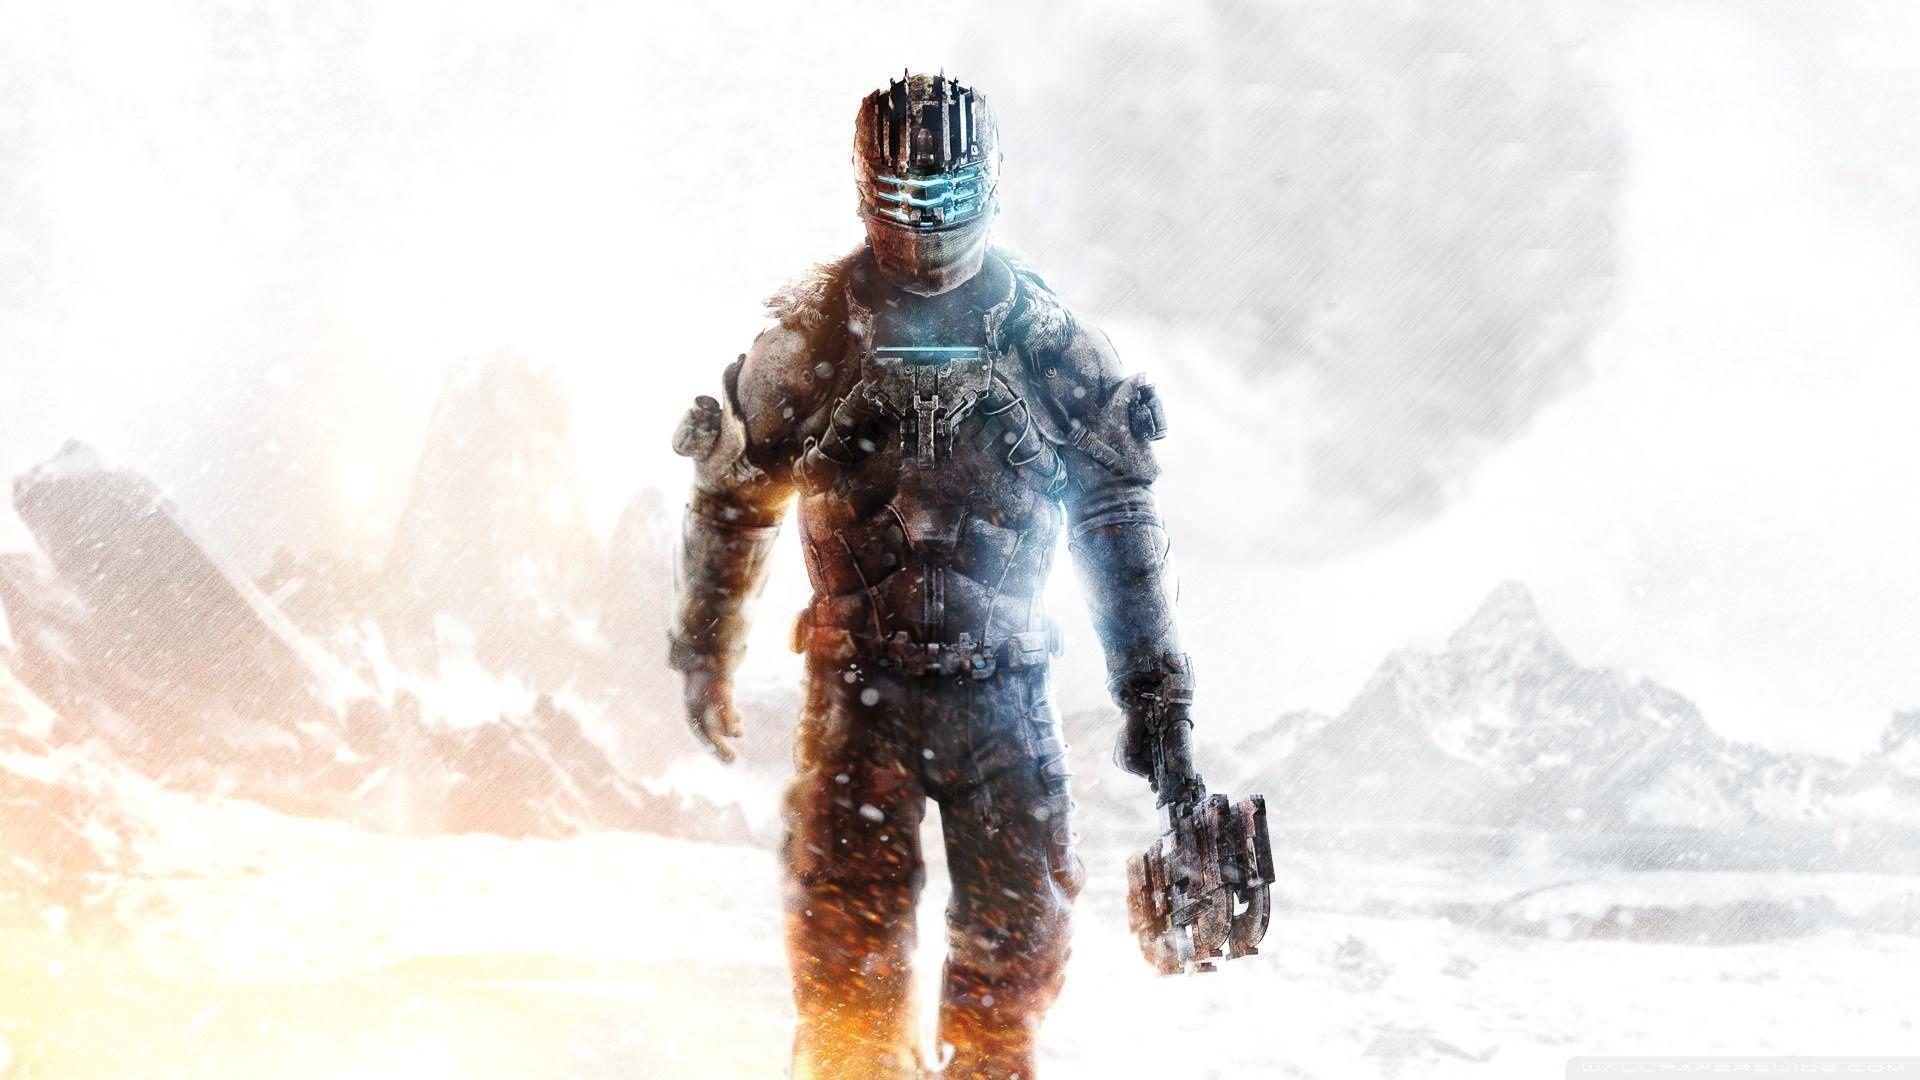 download free dead space 3